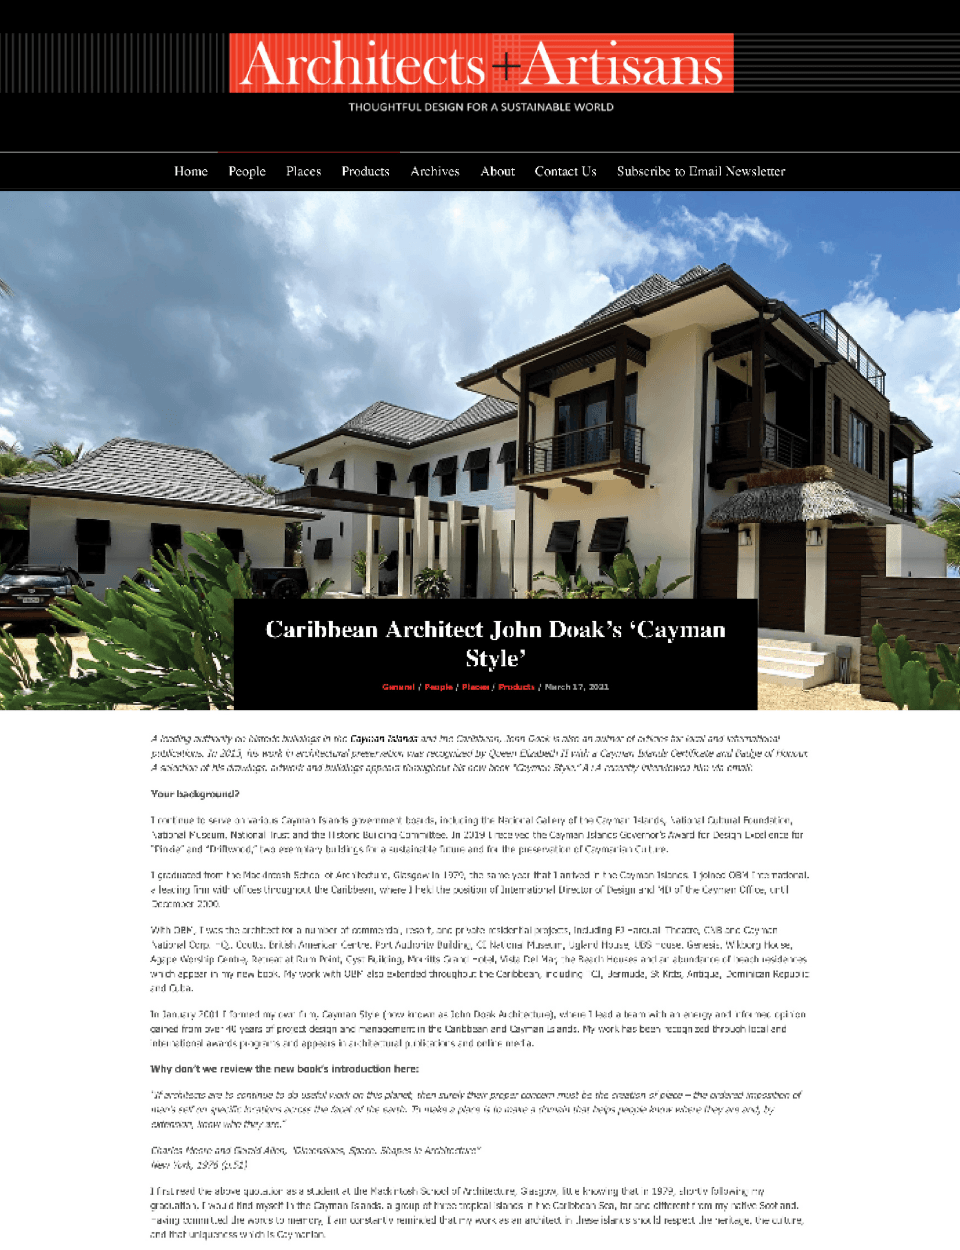 a screenshot of a website for architects and artisans showing a large house